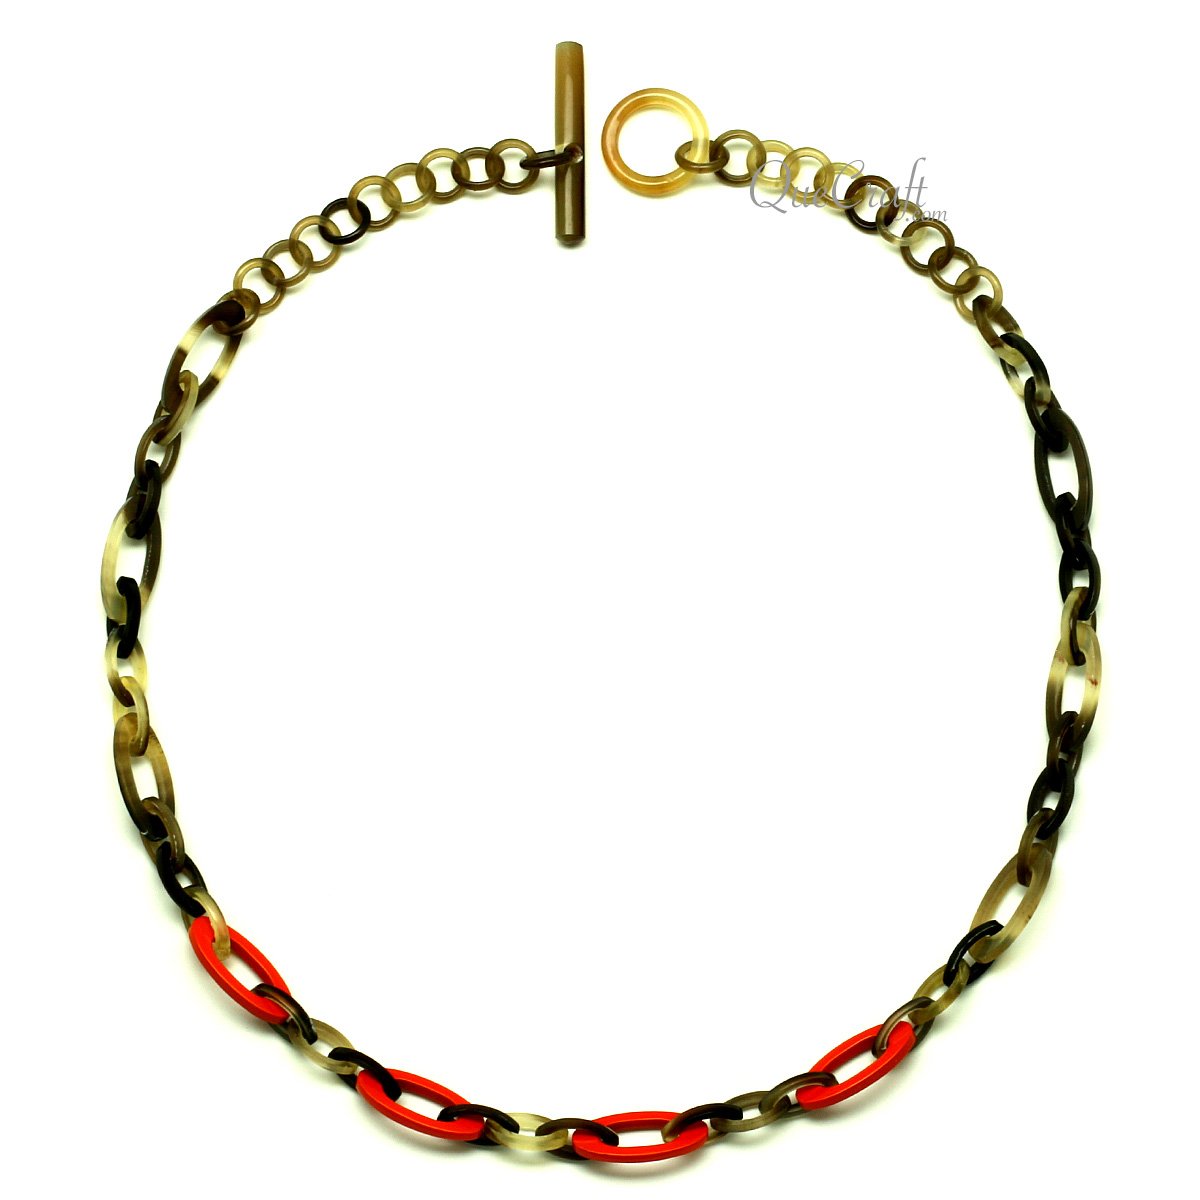 Horn & Lacquer Chain Necklace #13190 - HORN JEWELRY